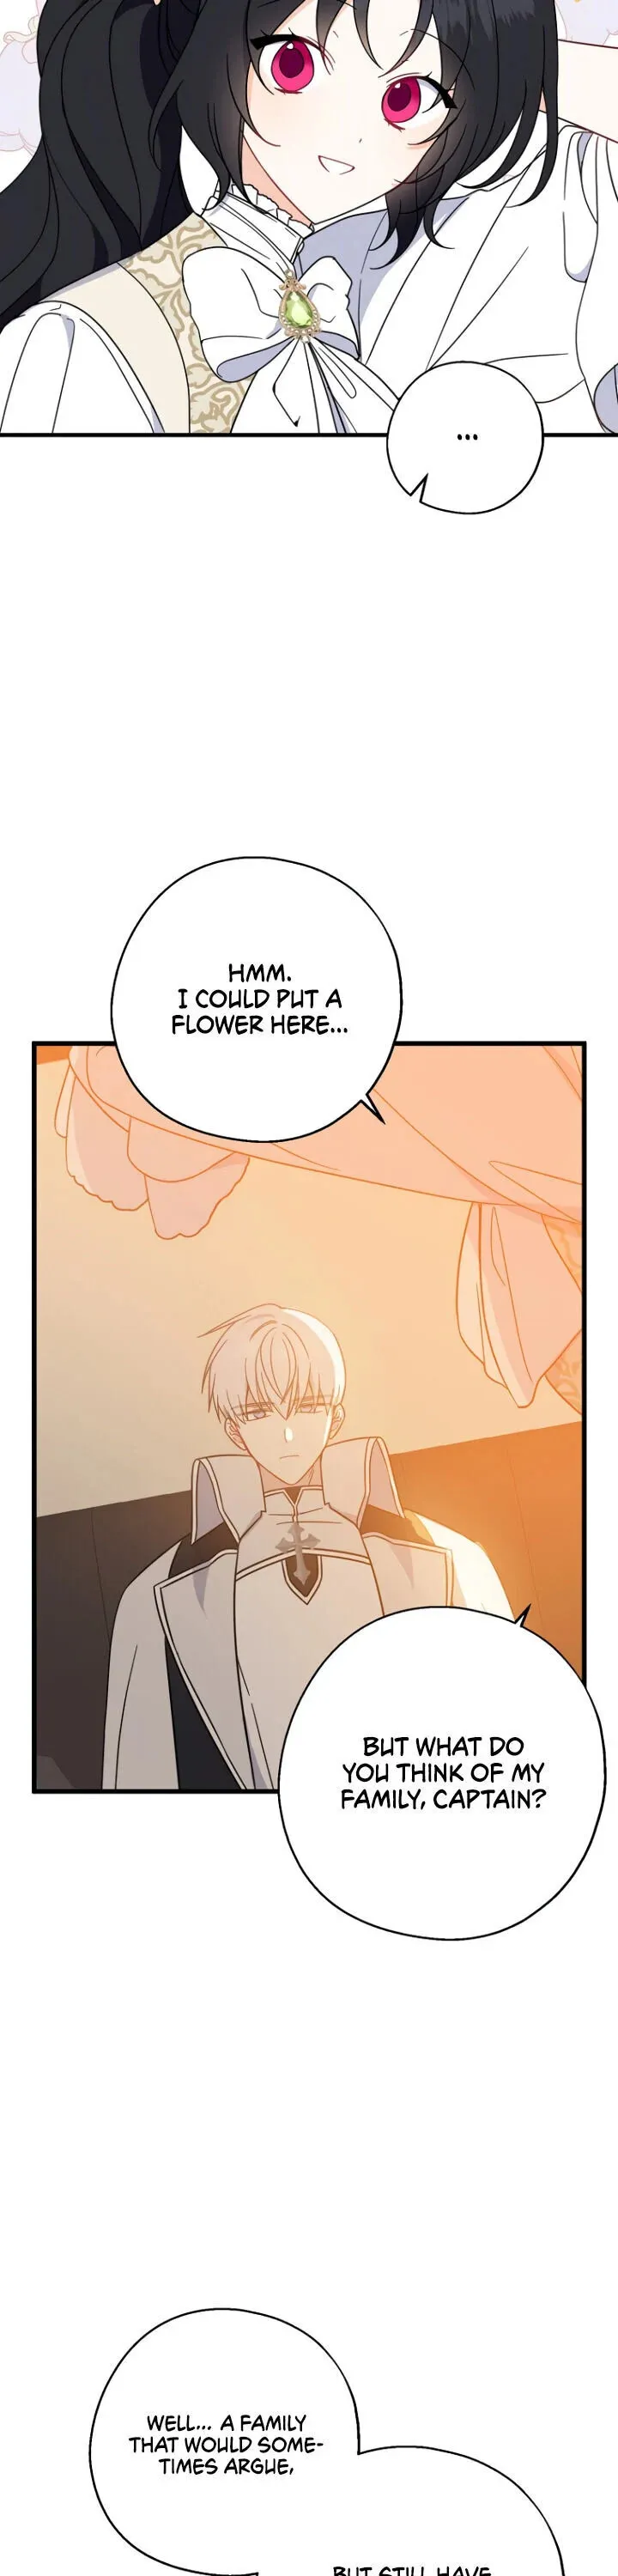 Here Comes the Silver Spoon!  - page 3